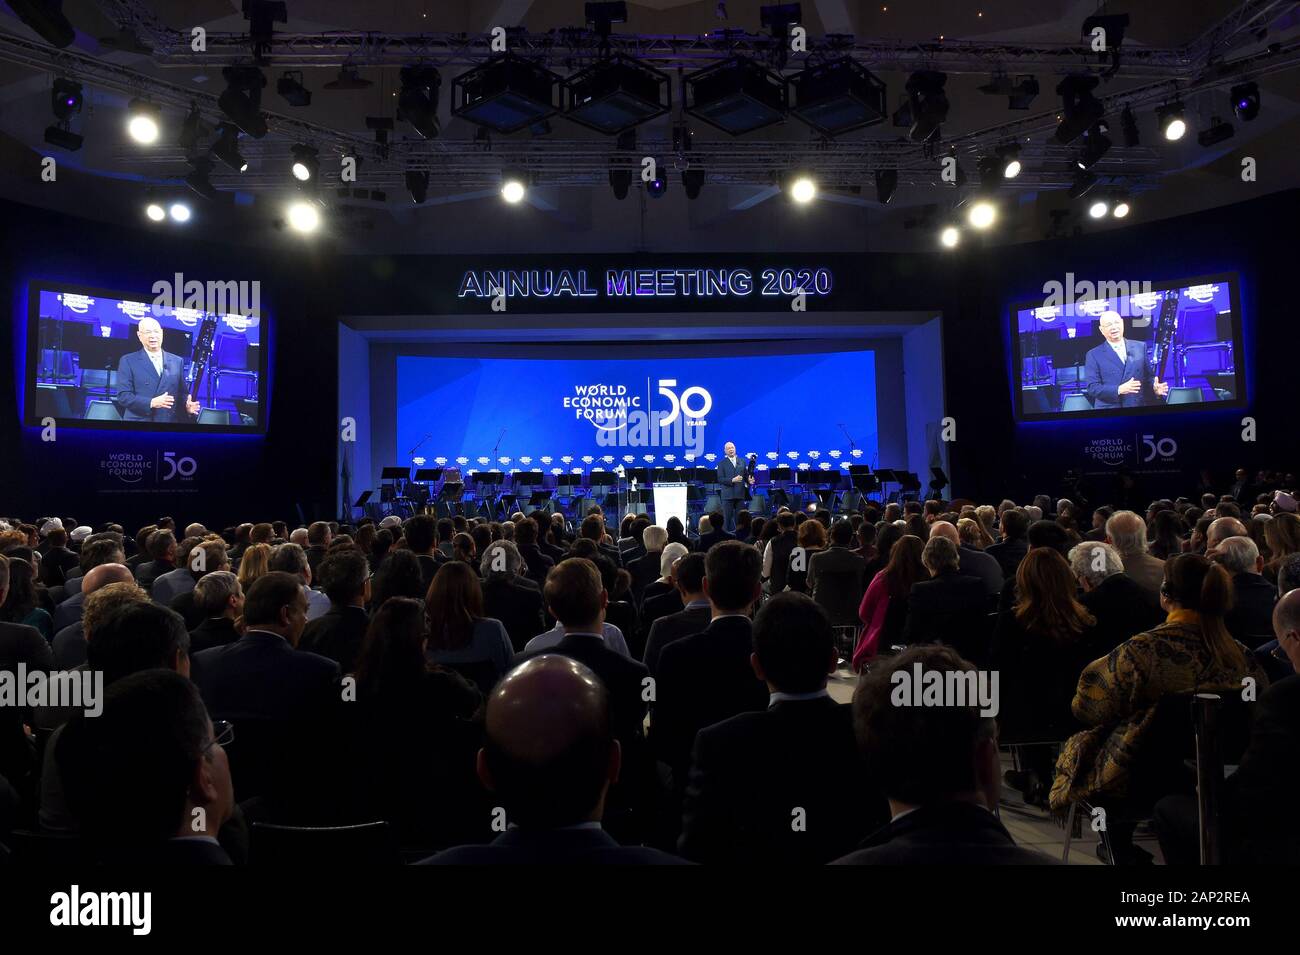 Davos, Switzerland. 20th Jan, 2020. Participants attend the Celebration of the 50th Anniversary of the World Economic Forum (WEF) in Davos, Switzerland, Jan. 20, 2020. The WEF Annual Meeting 2020 is scheduled to take place on Jan. 21-24 in Davos-Klosters in Switzerland. Credit: Guo Chen/Xinhua/Alamy Live News Stock Photo